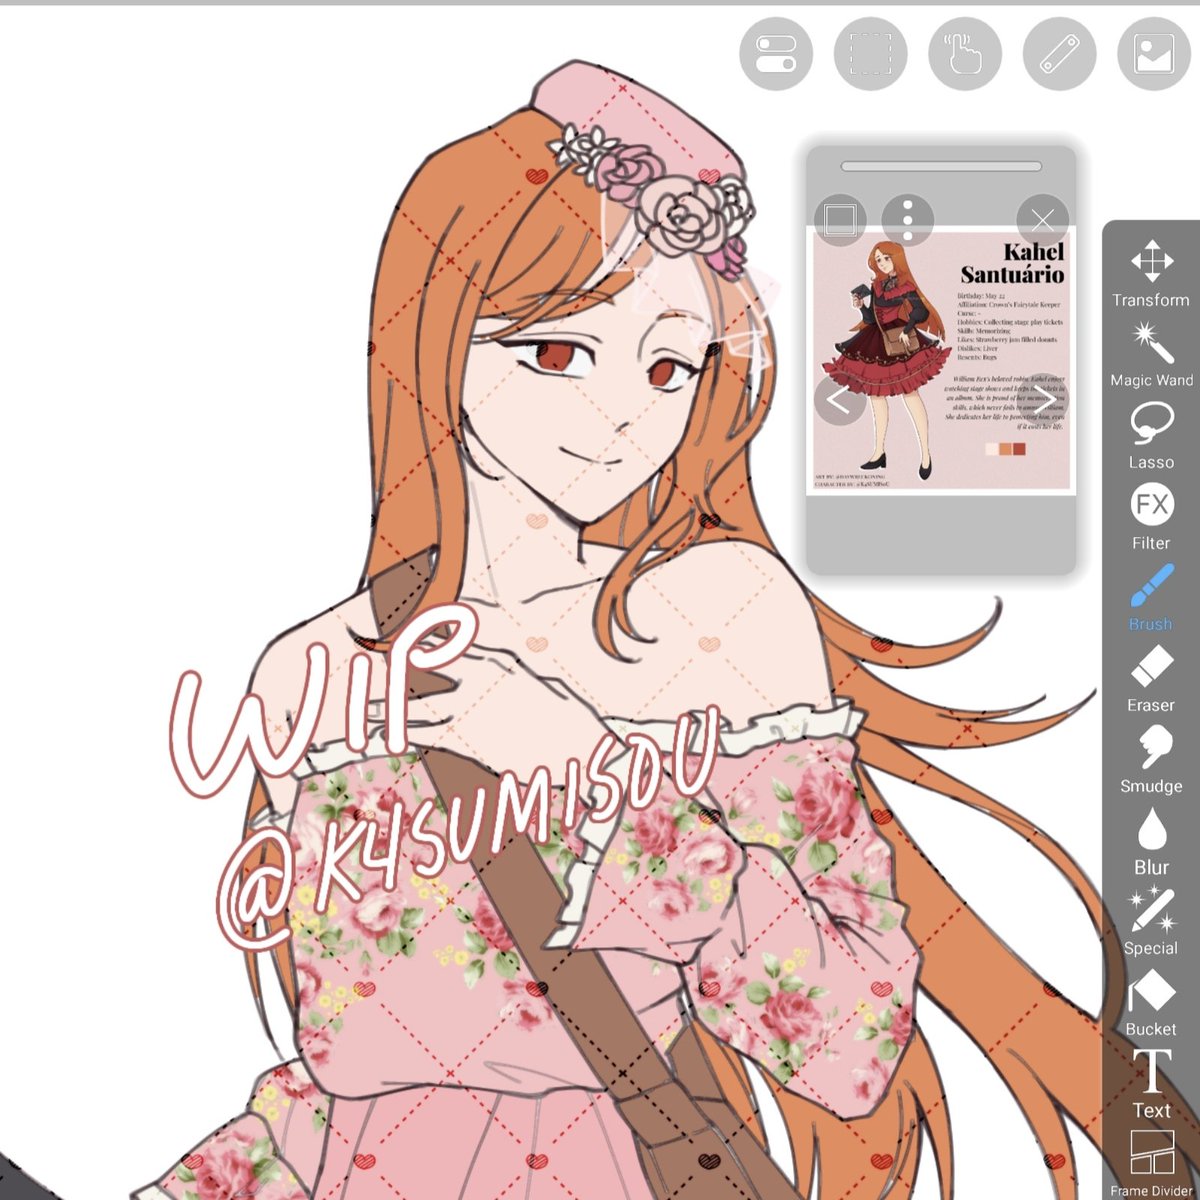 another ikevil yumesona in progress